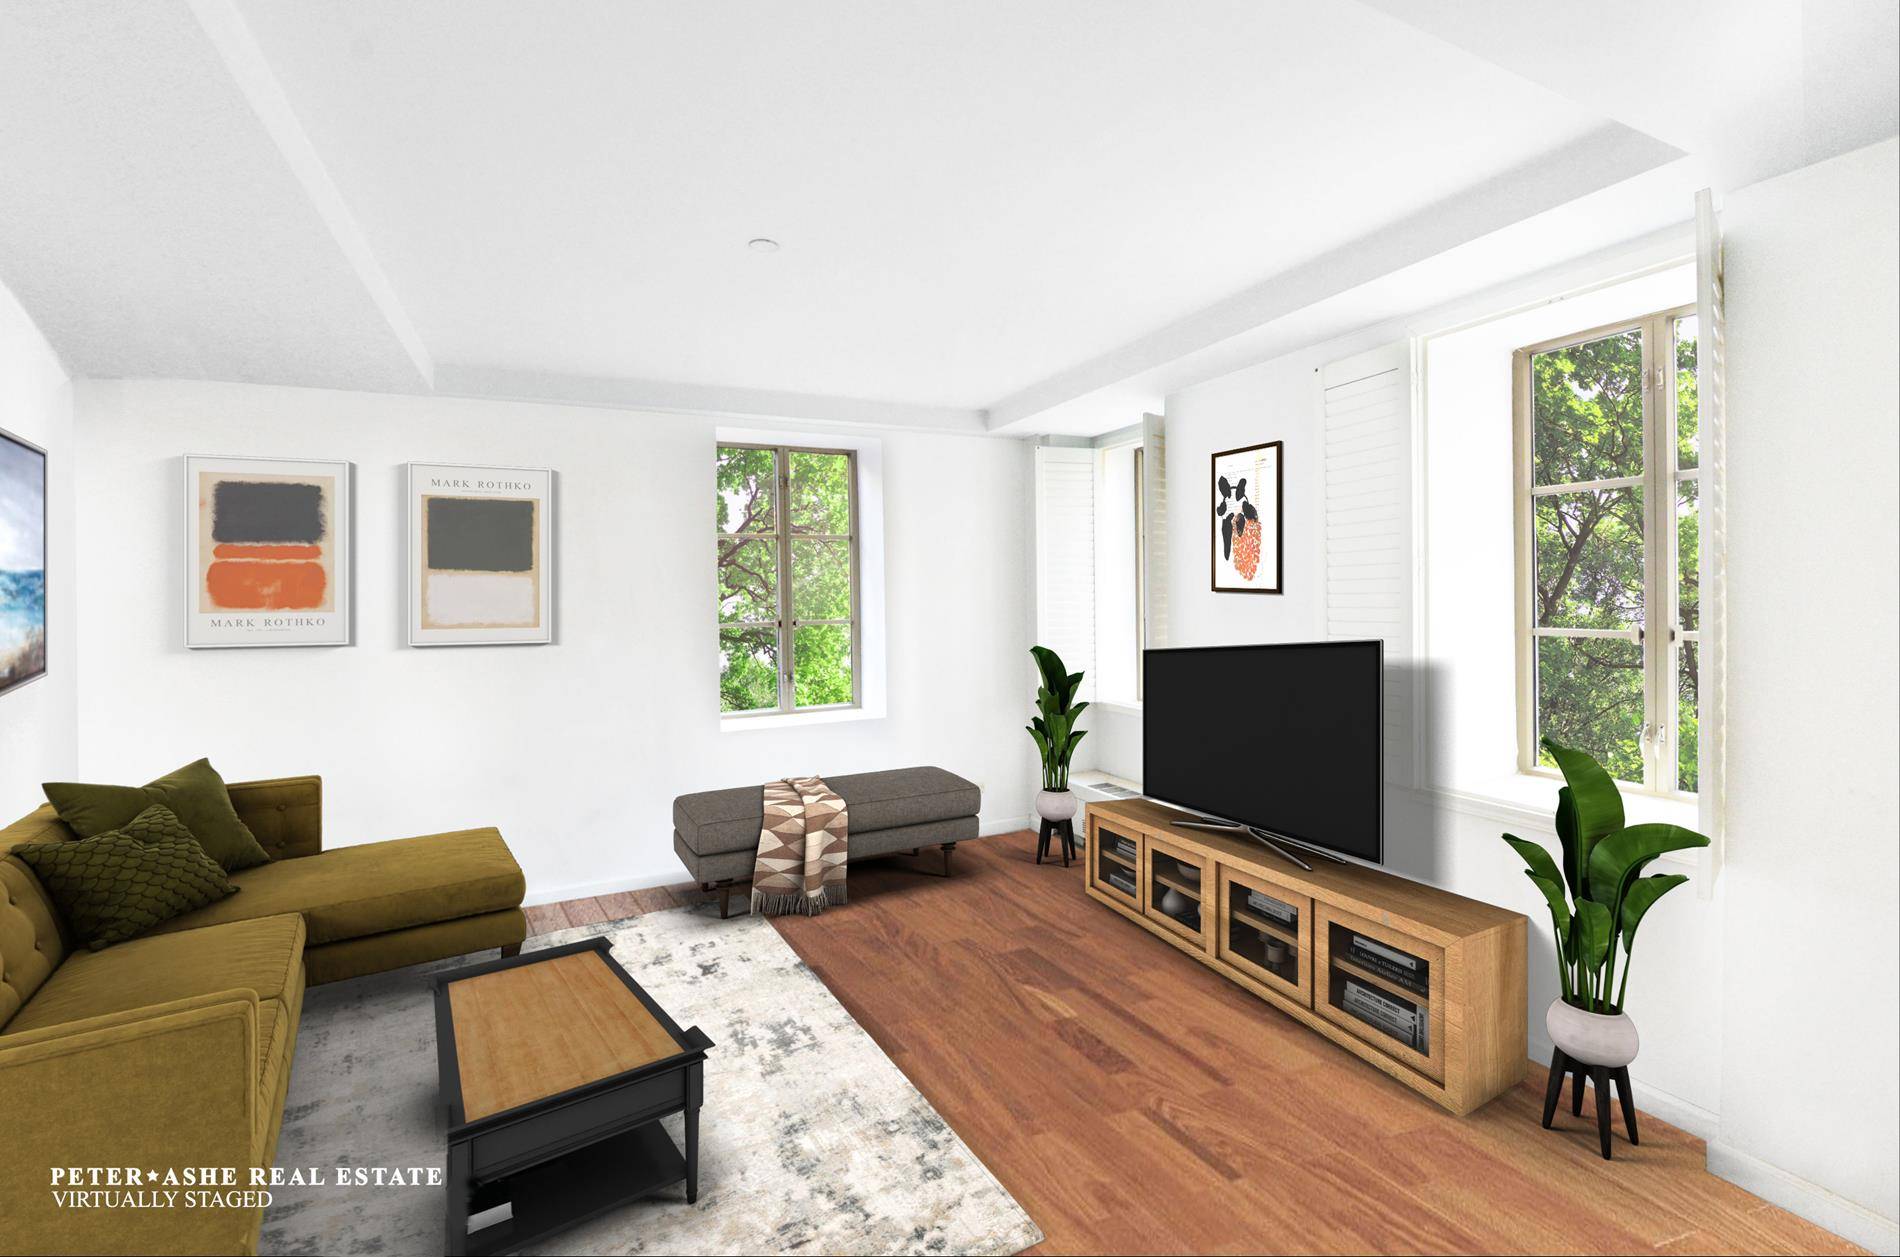 Discover the Potential of this beautiful home in Lenox Hill.